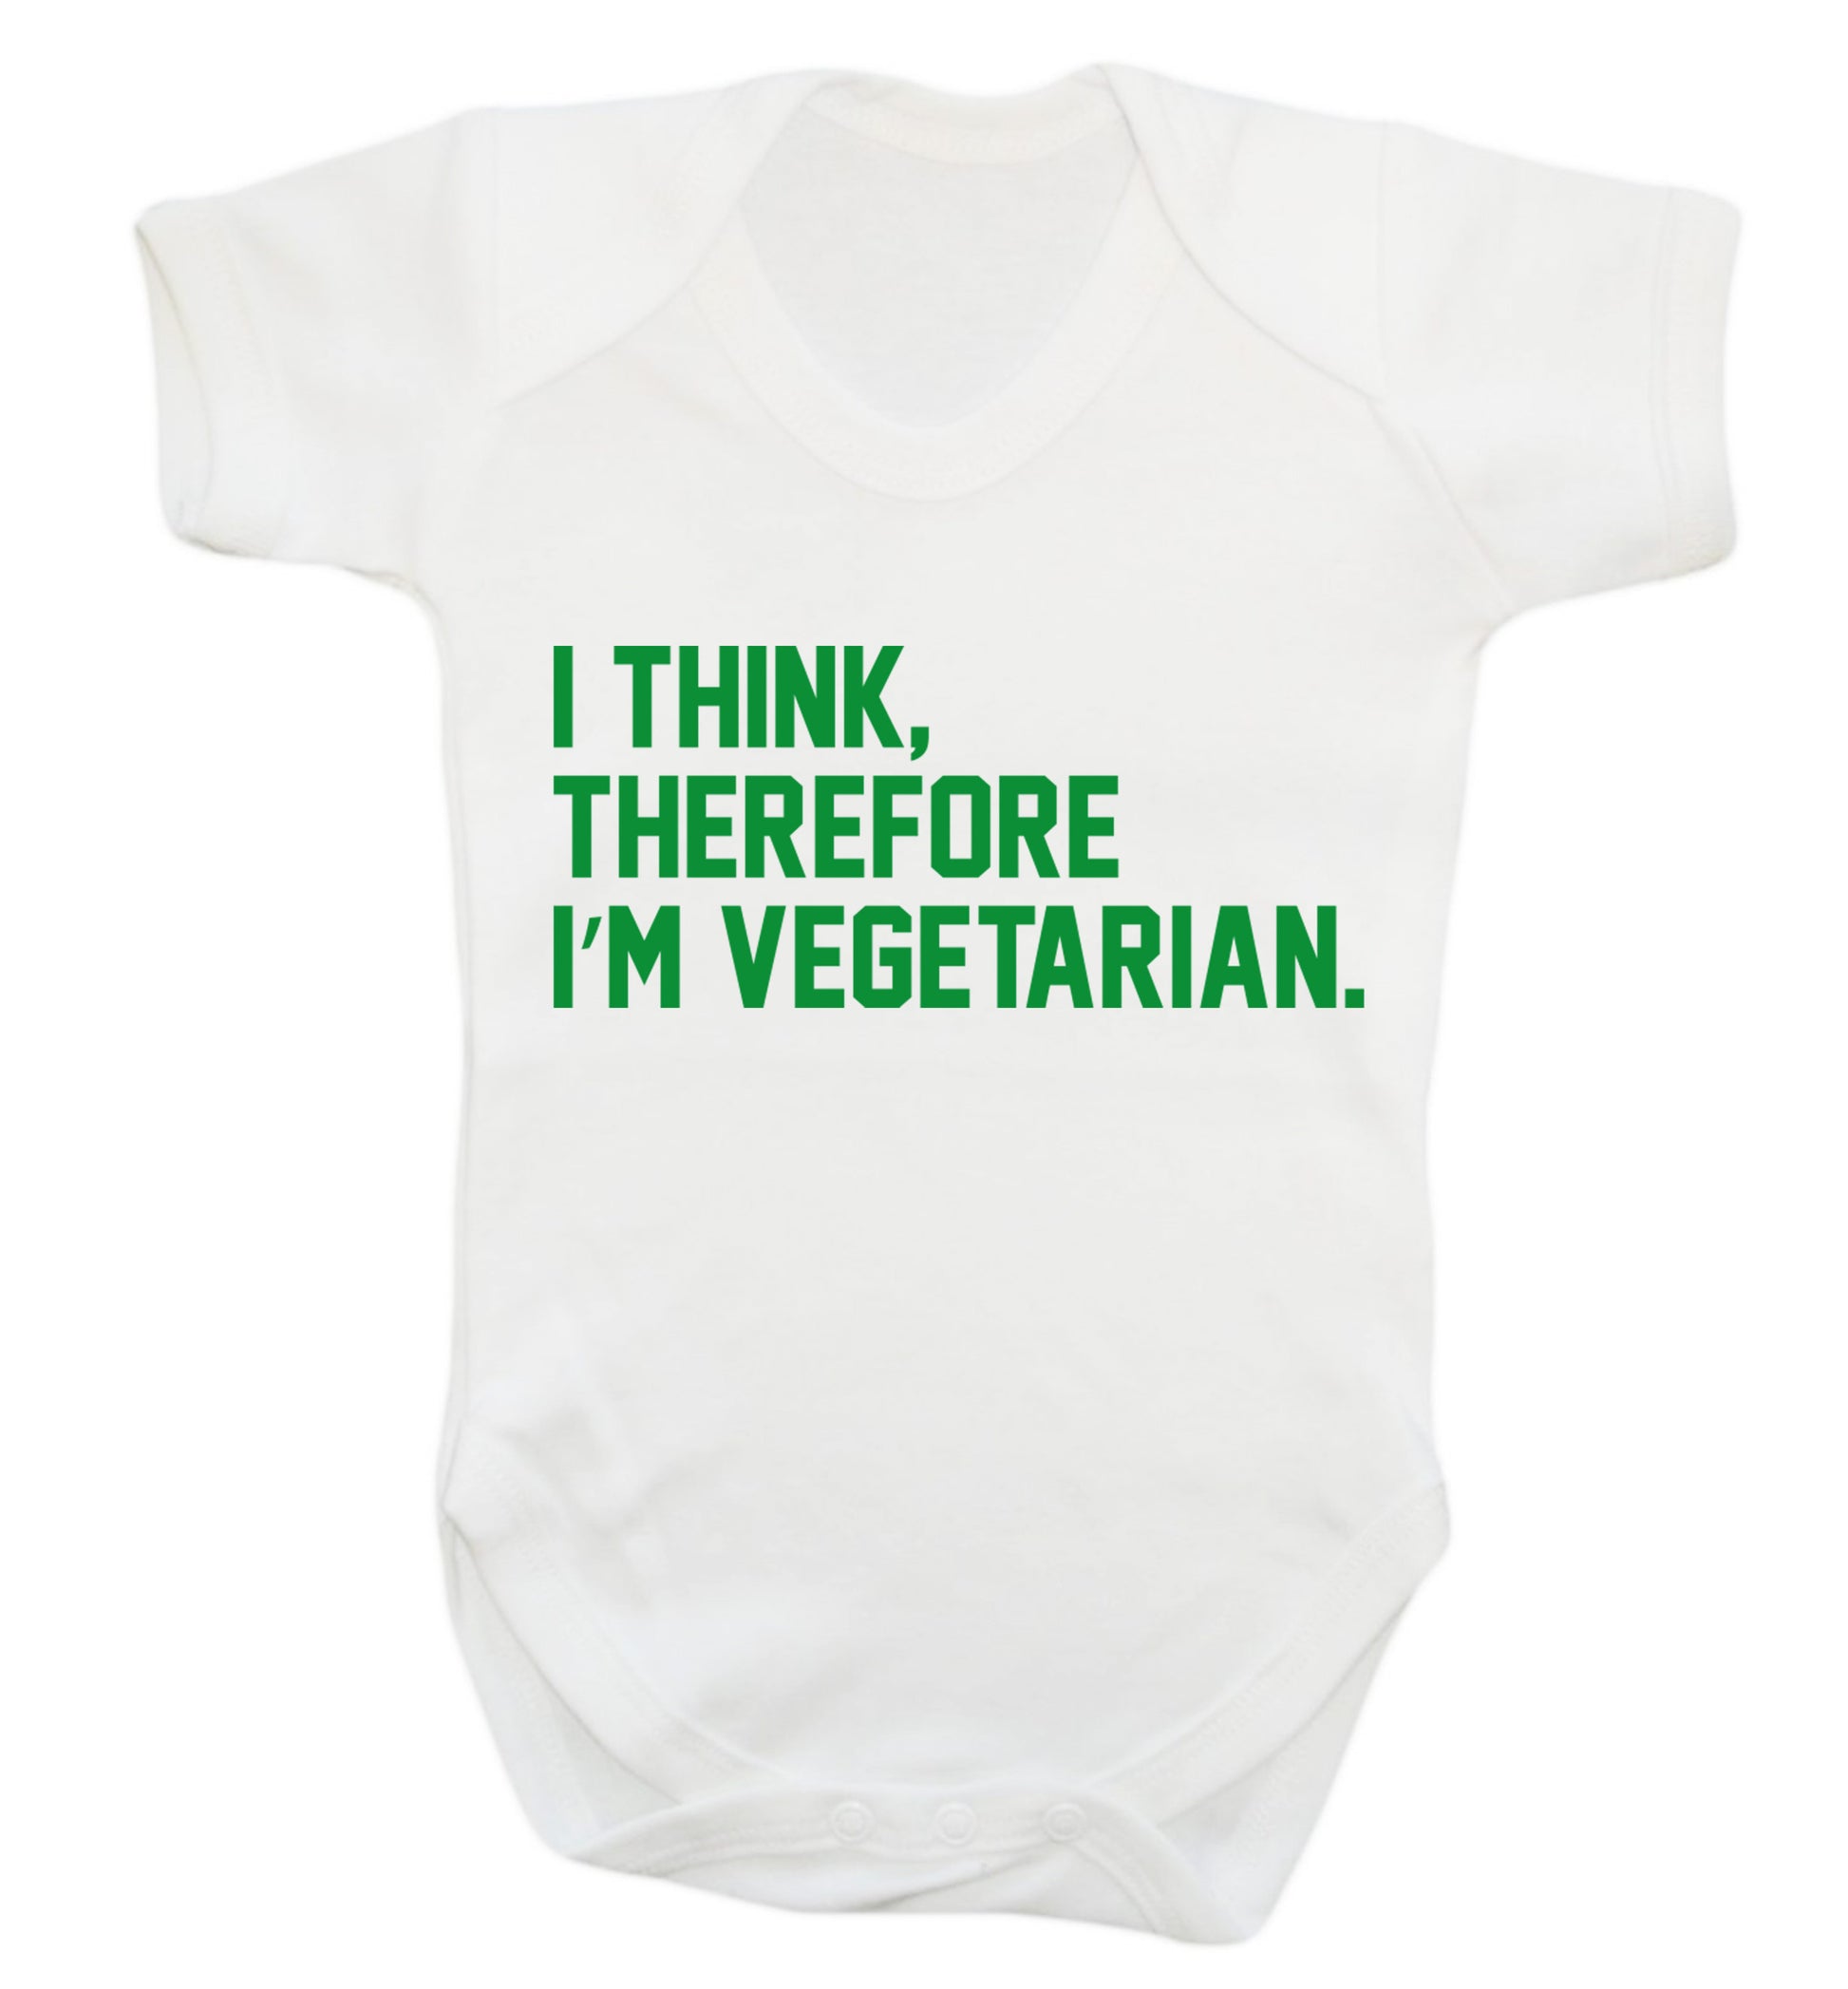 I think therefore I'm vegetarian Baby Vest white 18-24 months